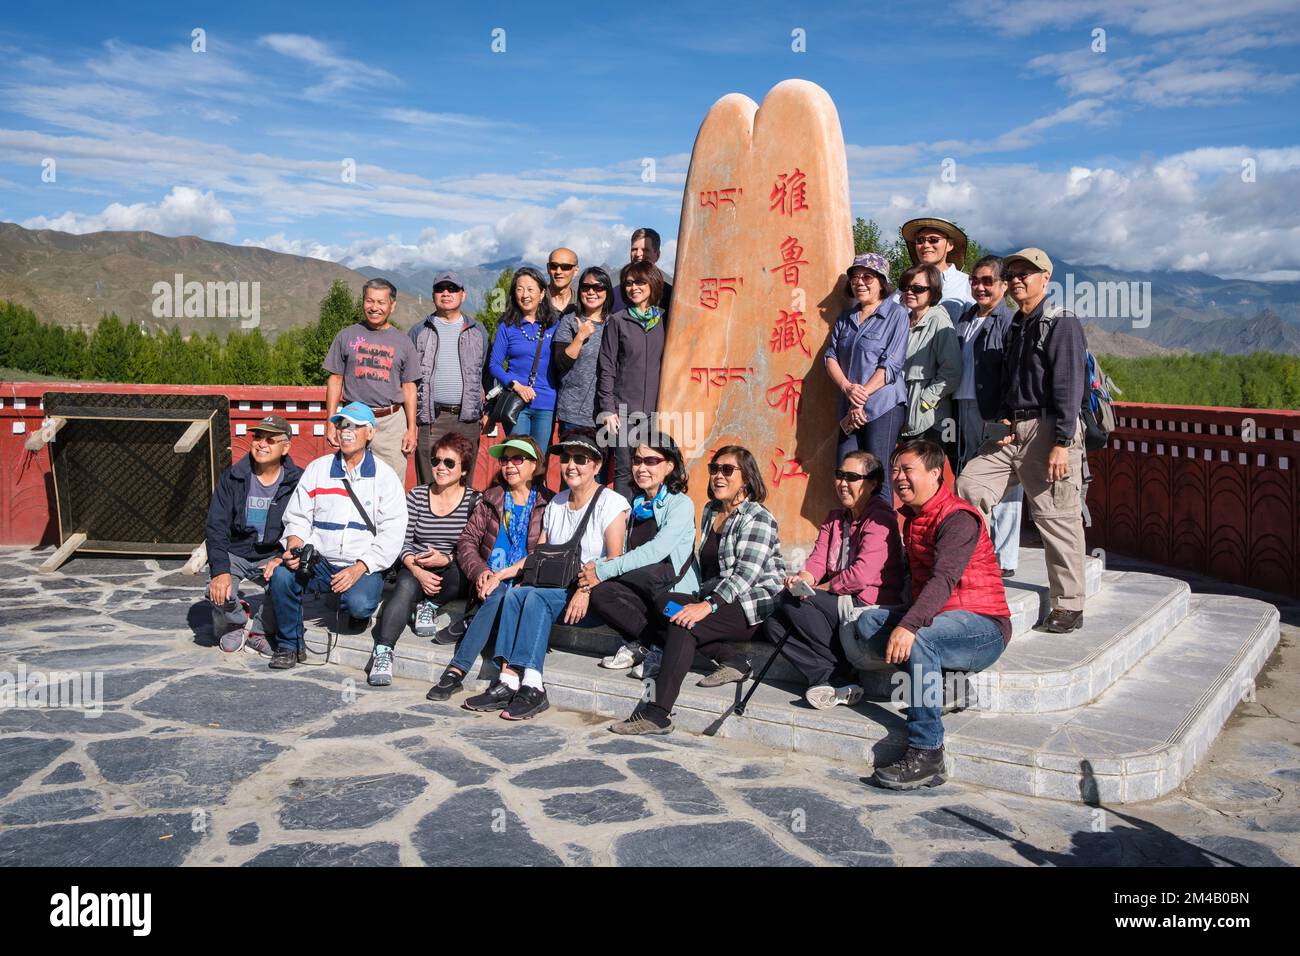 A group of Chinese tourists photographed at a lookout point at the Yarlung Tsangpo southwest of Lhasa. Tibet Autonomous Region. China. Stock Photo